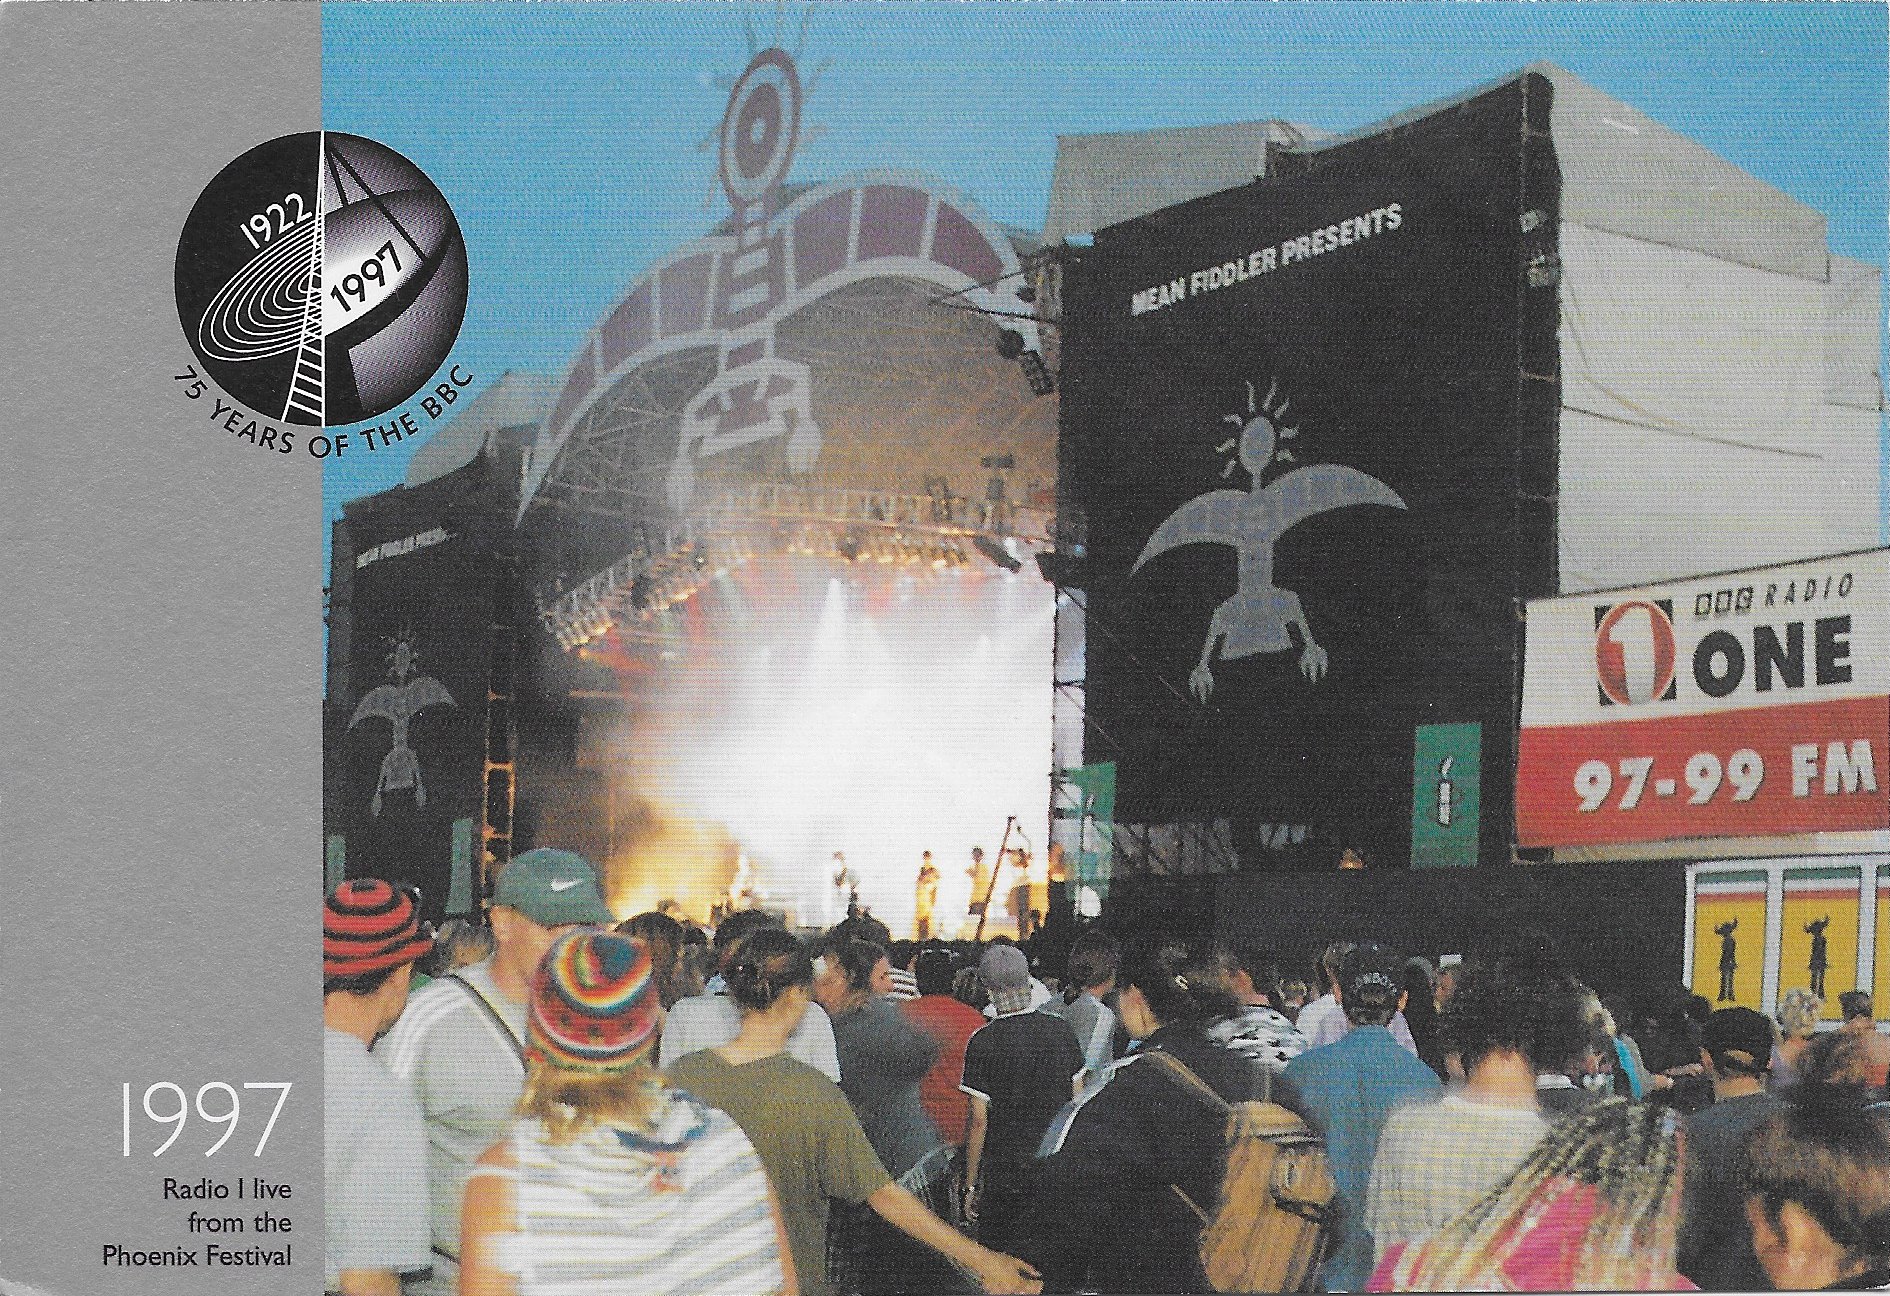 Picture of PC-BBC75-b1997 75 years of the BBC - Radio 1 live from the Phoenix Festival by artist Unknown from the BBC postcards - Records and Tapes library